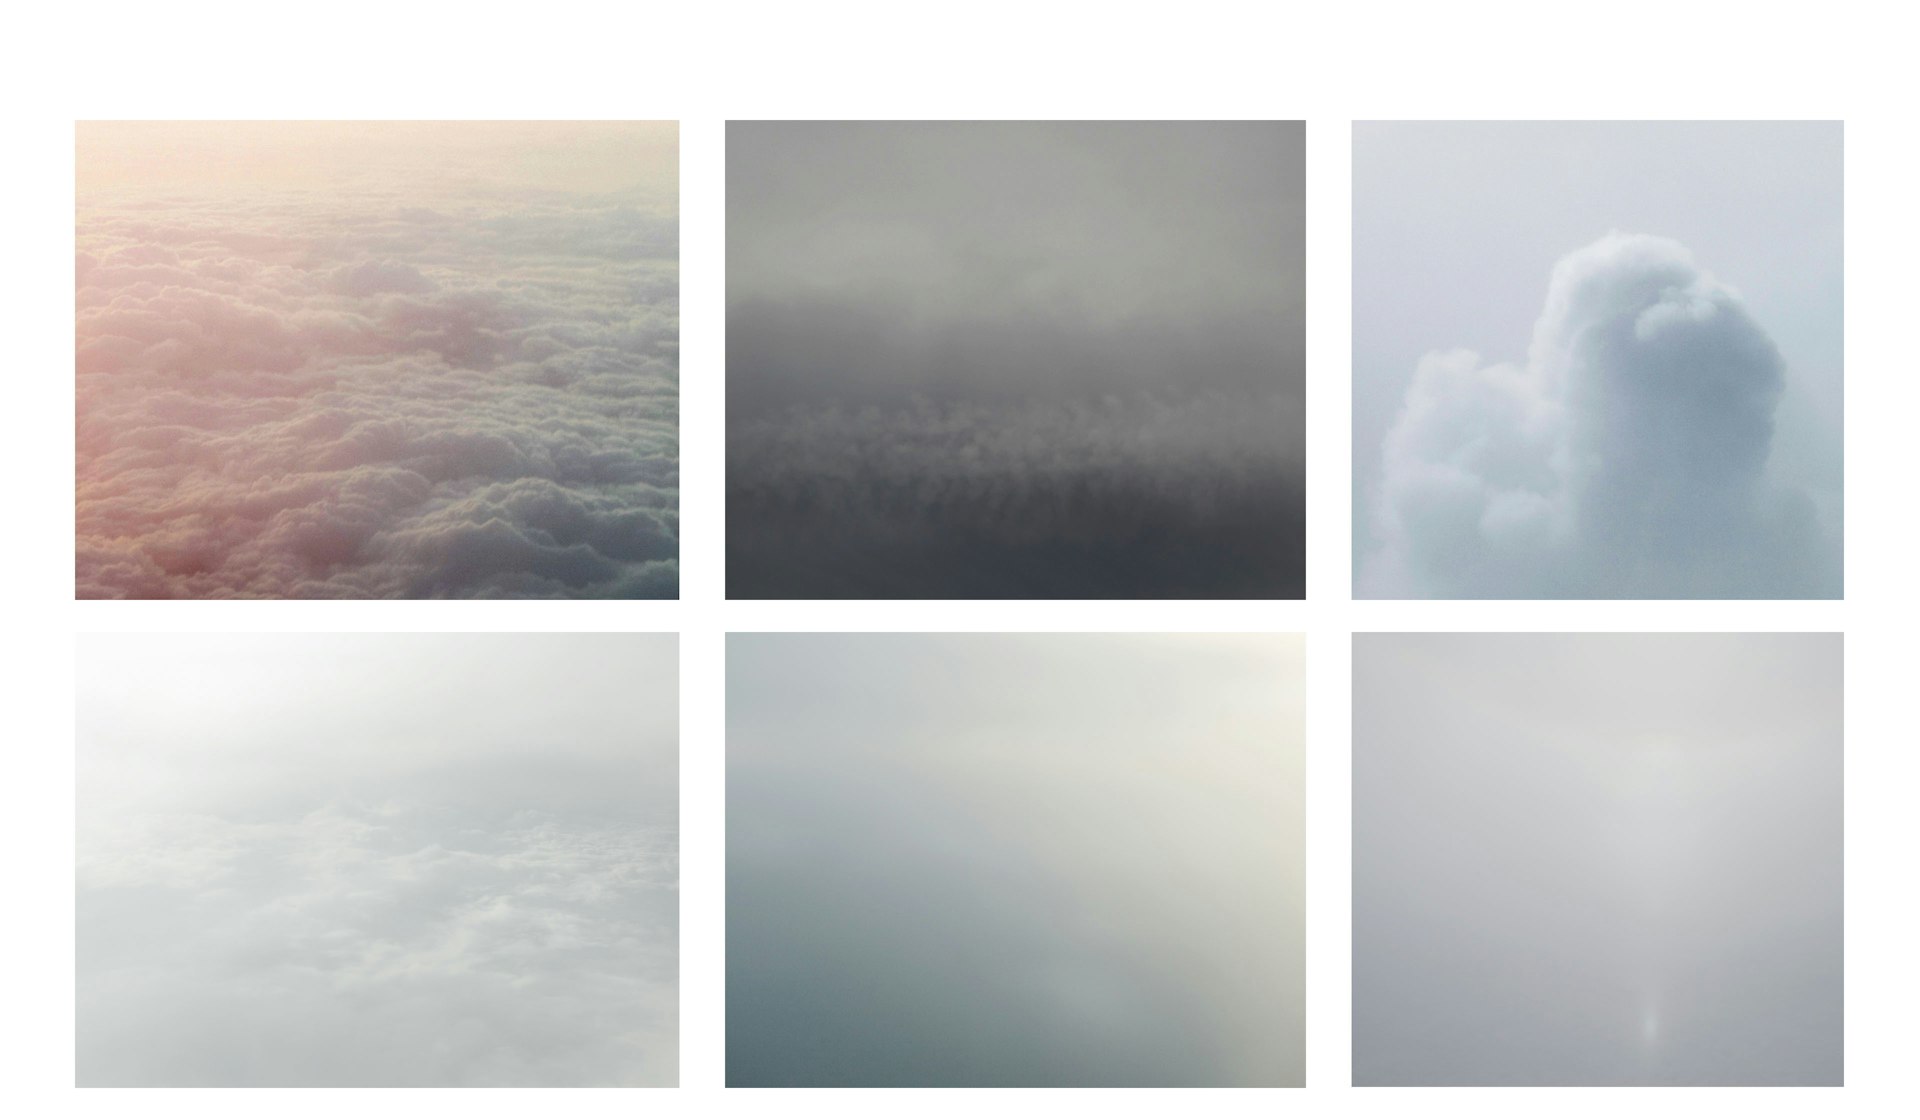 The breathtaking cloudscapes of photographer Benedict Redgrove